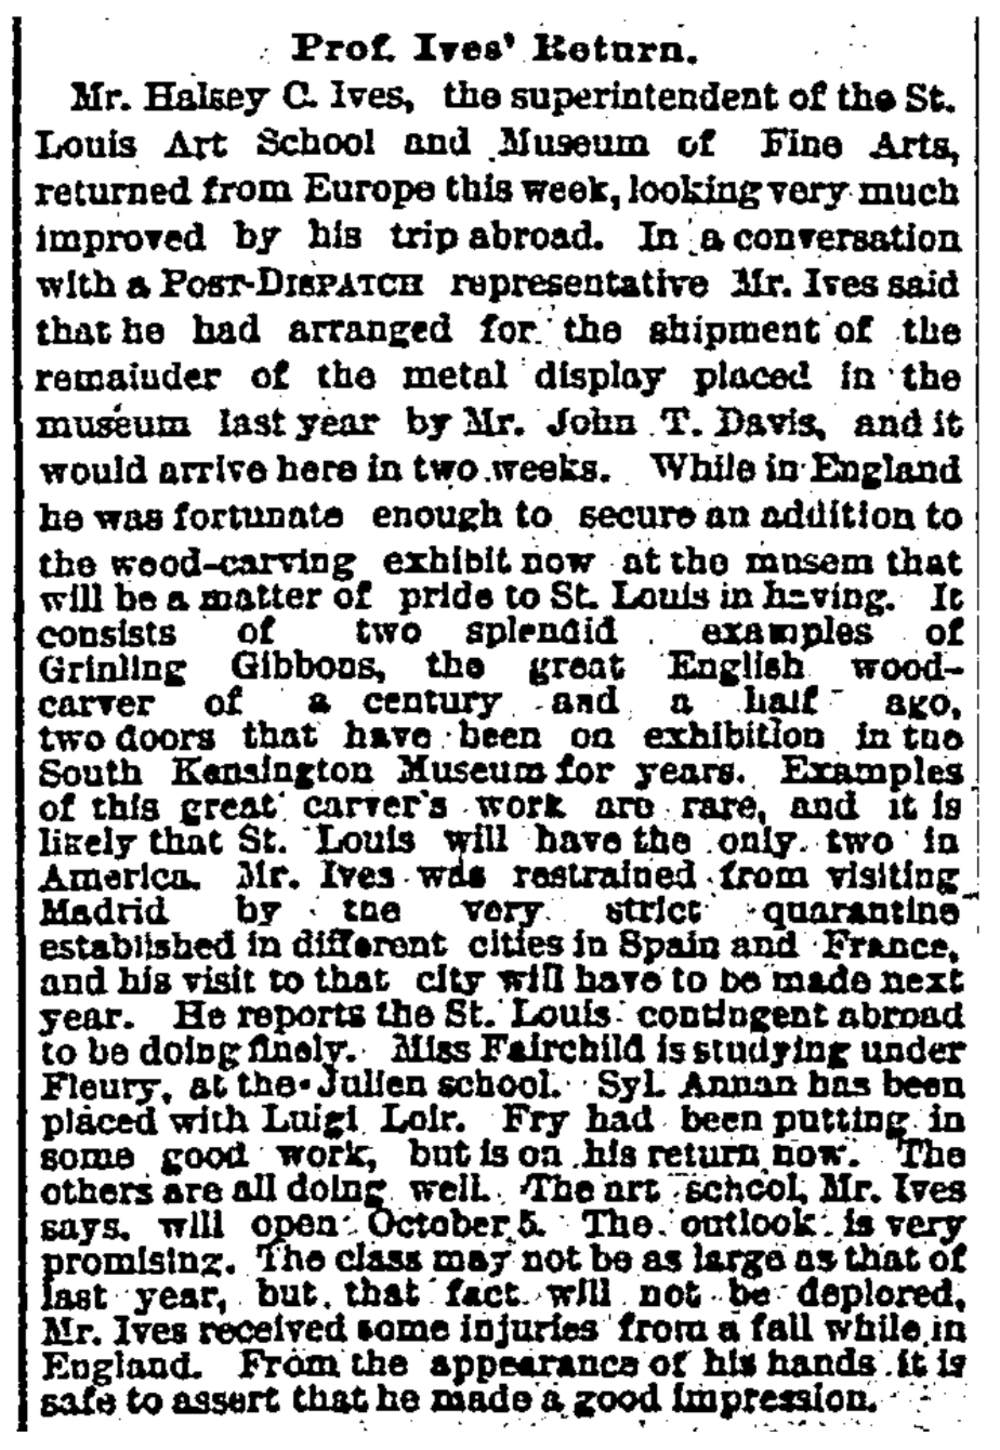 The article "Prof. Ives' Return" from the St. Louis Post-Dispatch